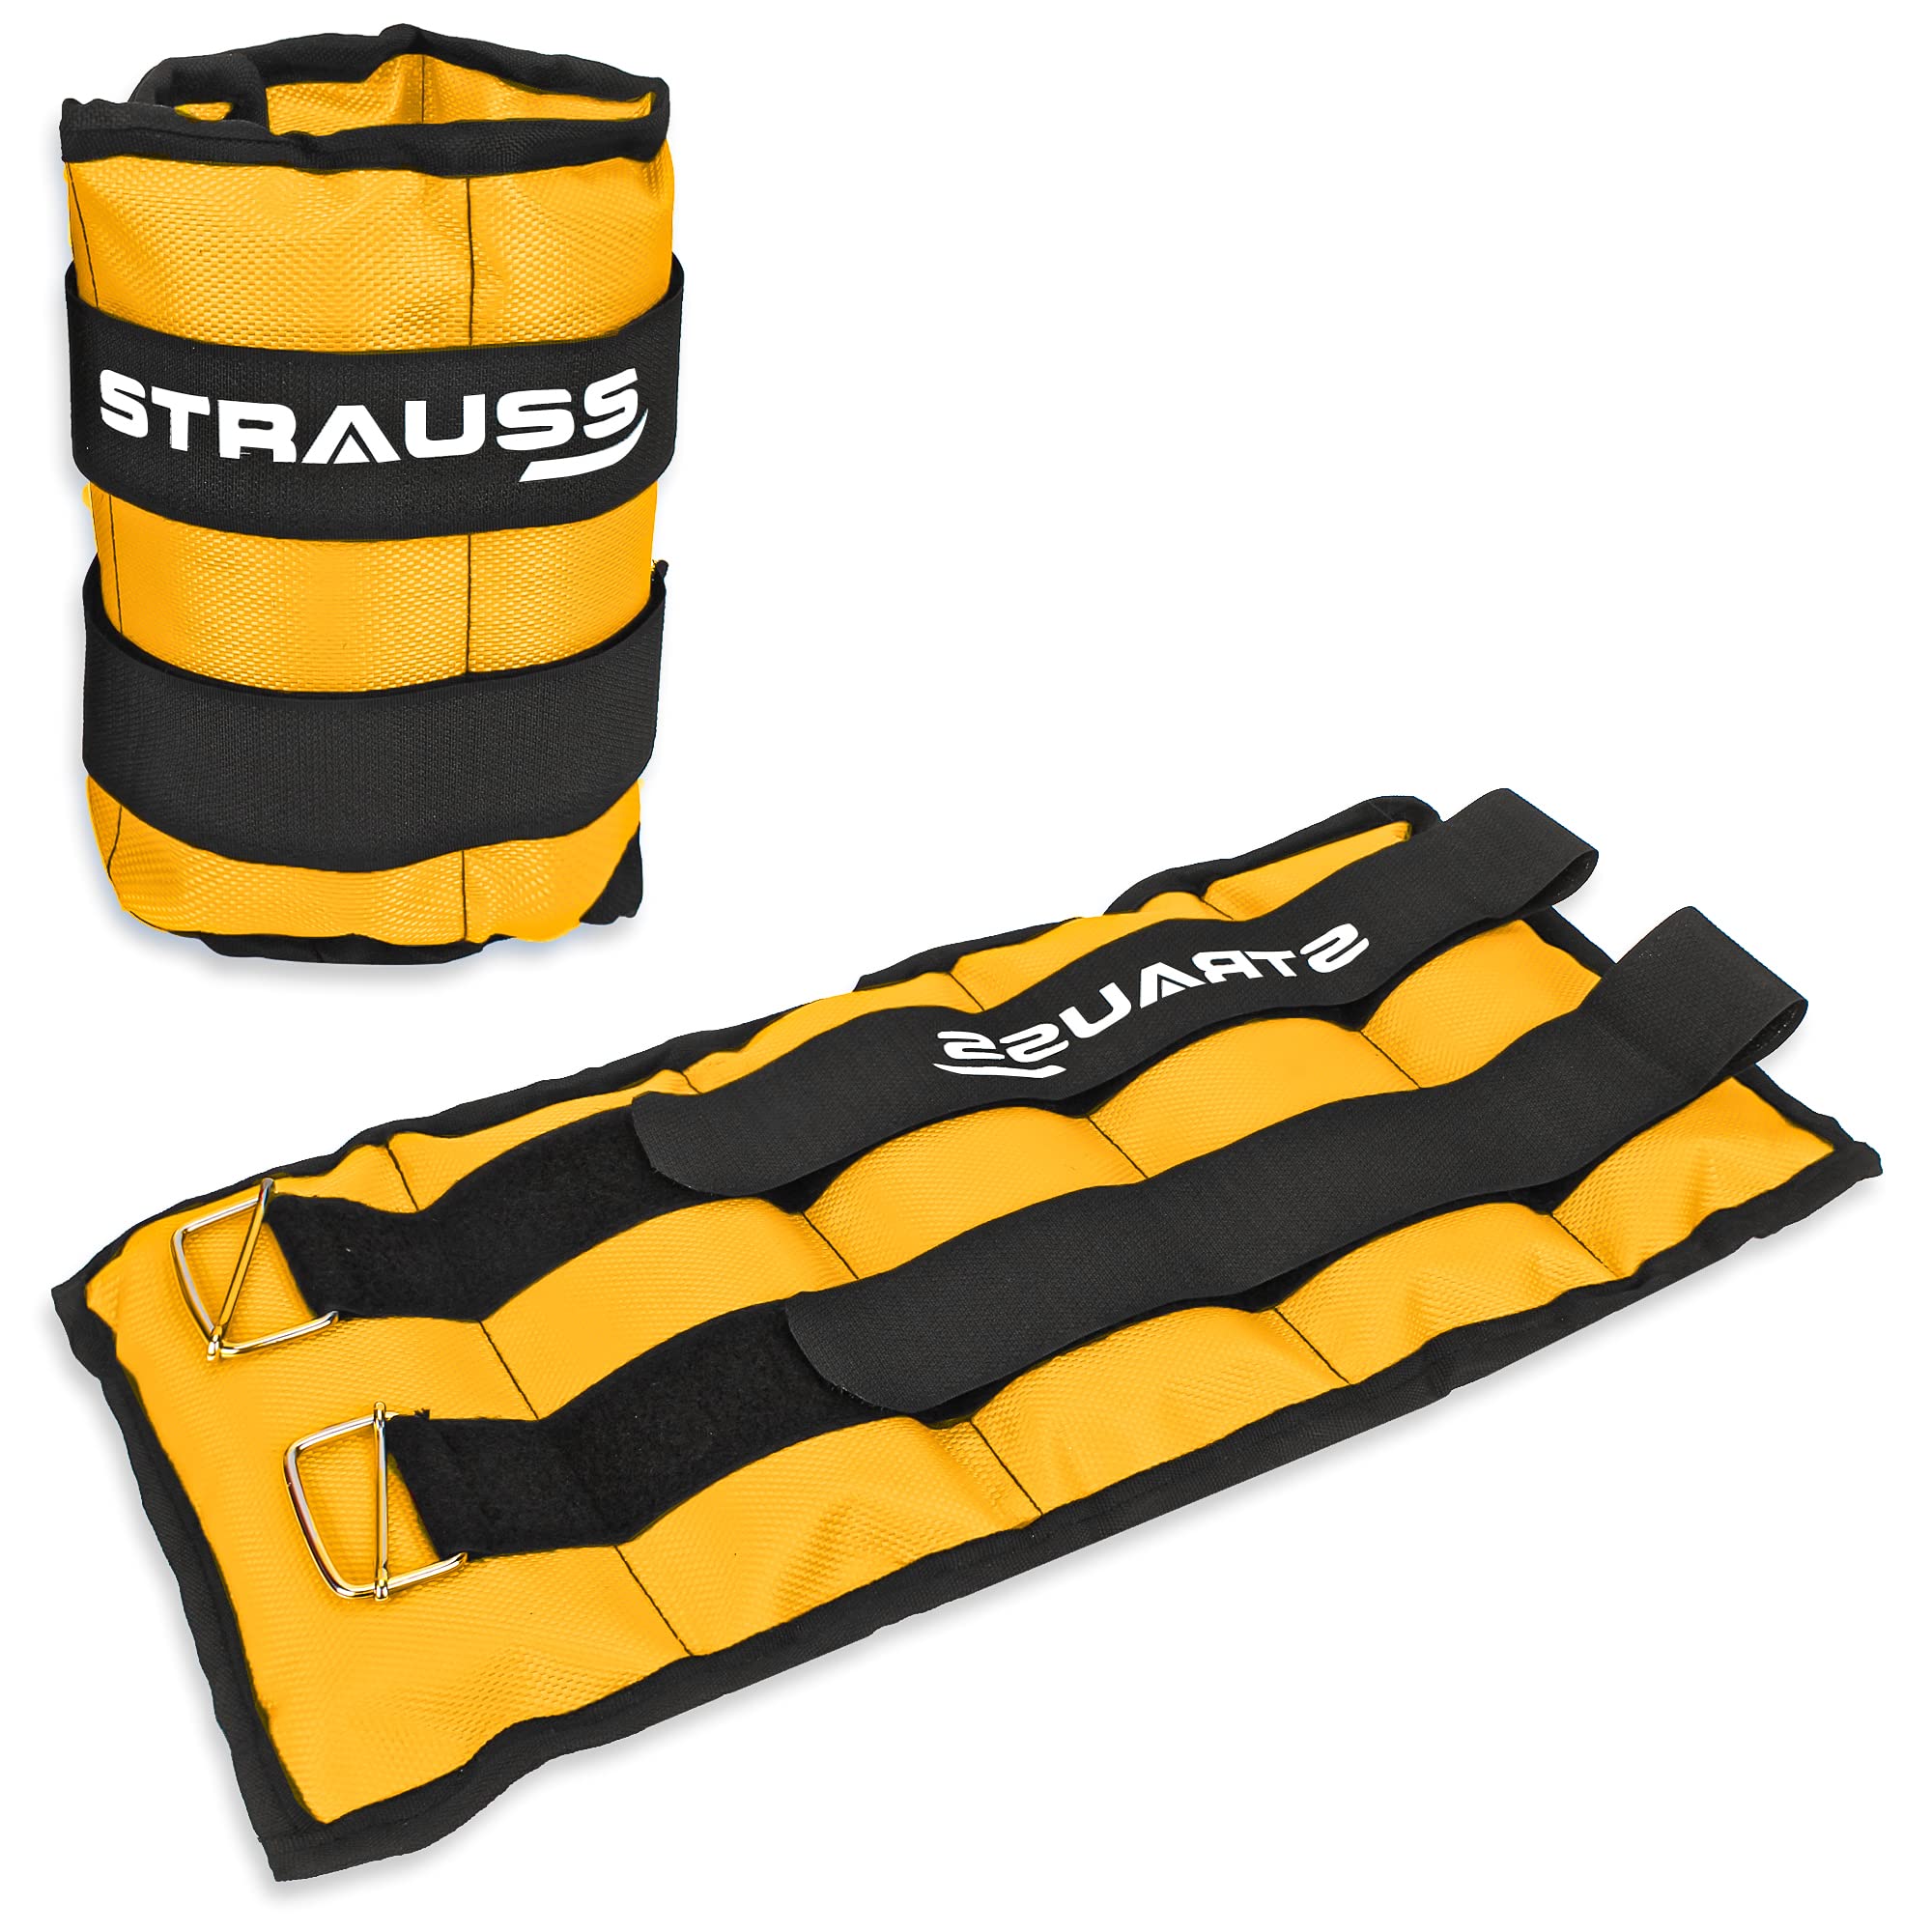 Strauss Adjustable Ankle/Wrist Weights 2 KG X 2 | Ideal for Walking, Running, Jogging, Cycling, Gym, Workout & Strength Training | Easy to Use on Ankle, Wrist, Leg, (Yellow)